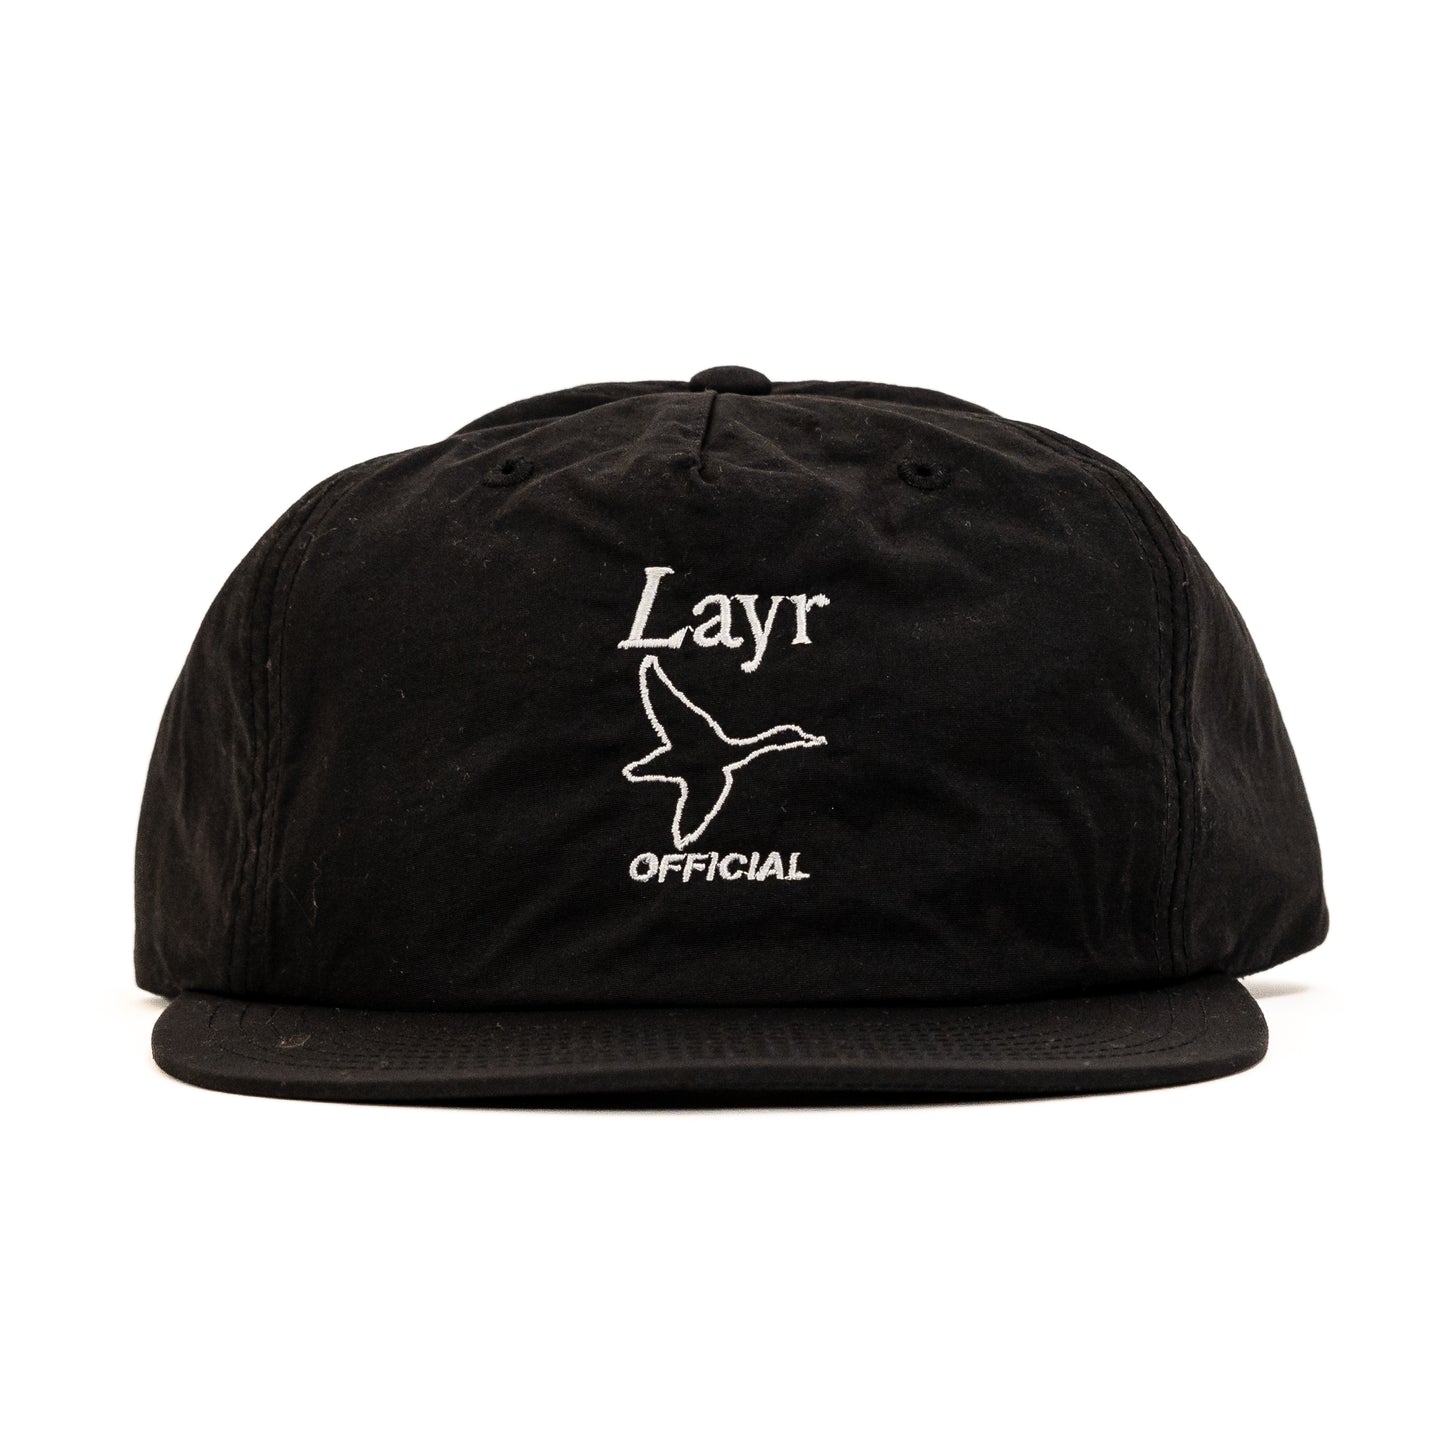 Flying Duck Surf Hat, Black - Layr Official